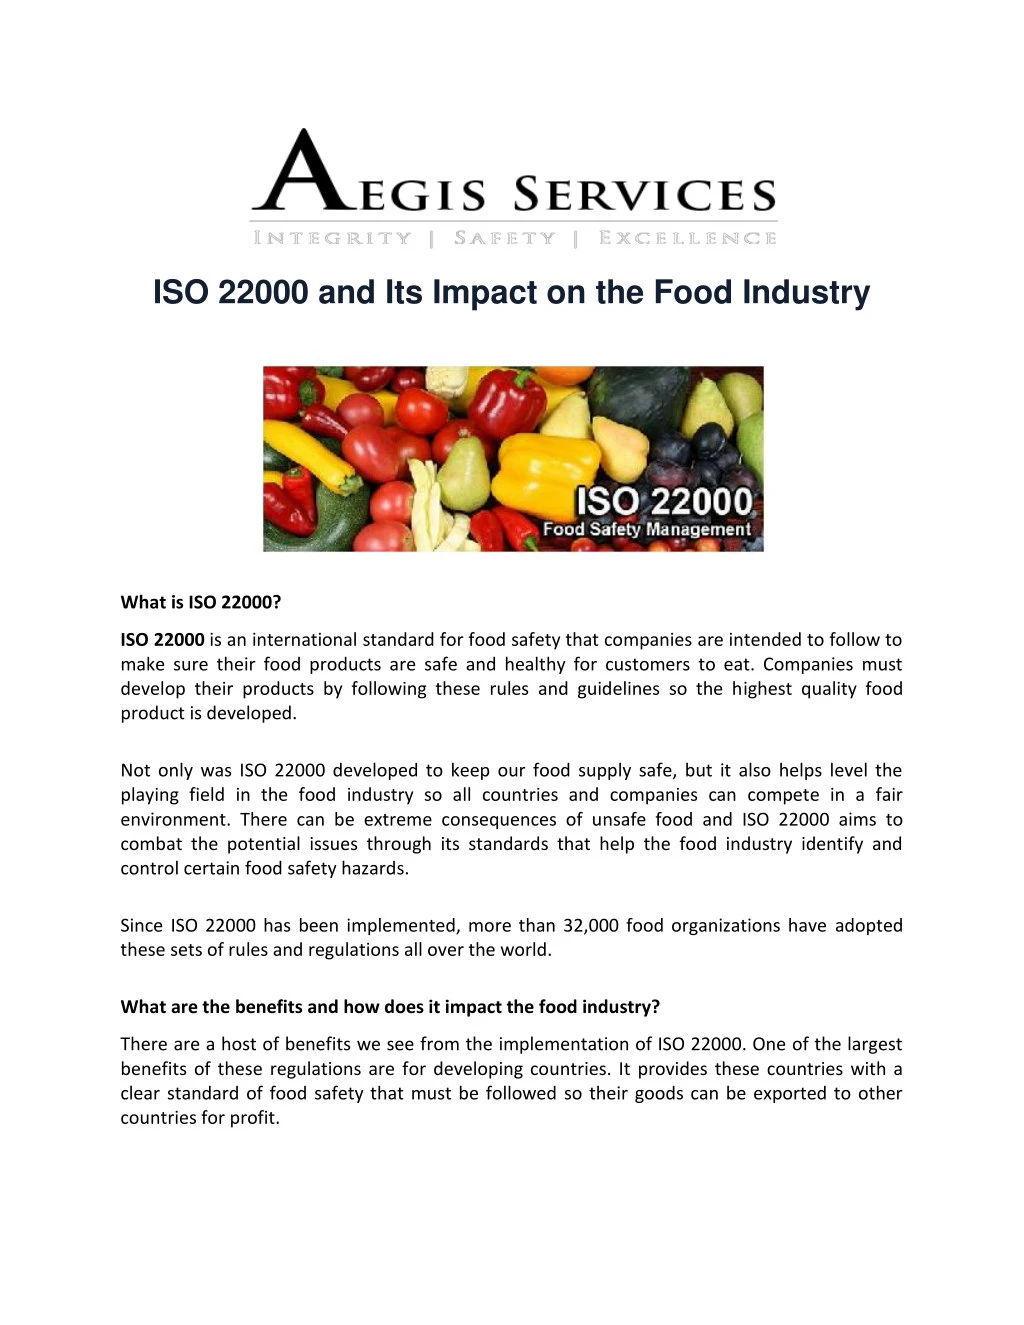 iso 22000 and its impact on the food industry